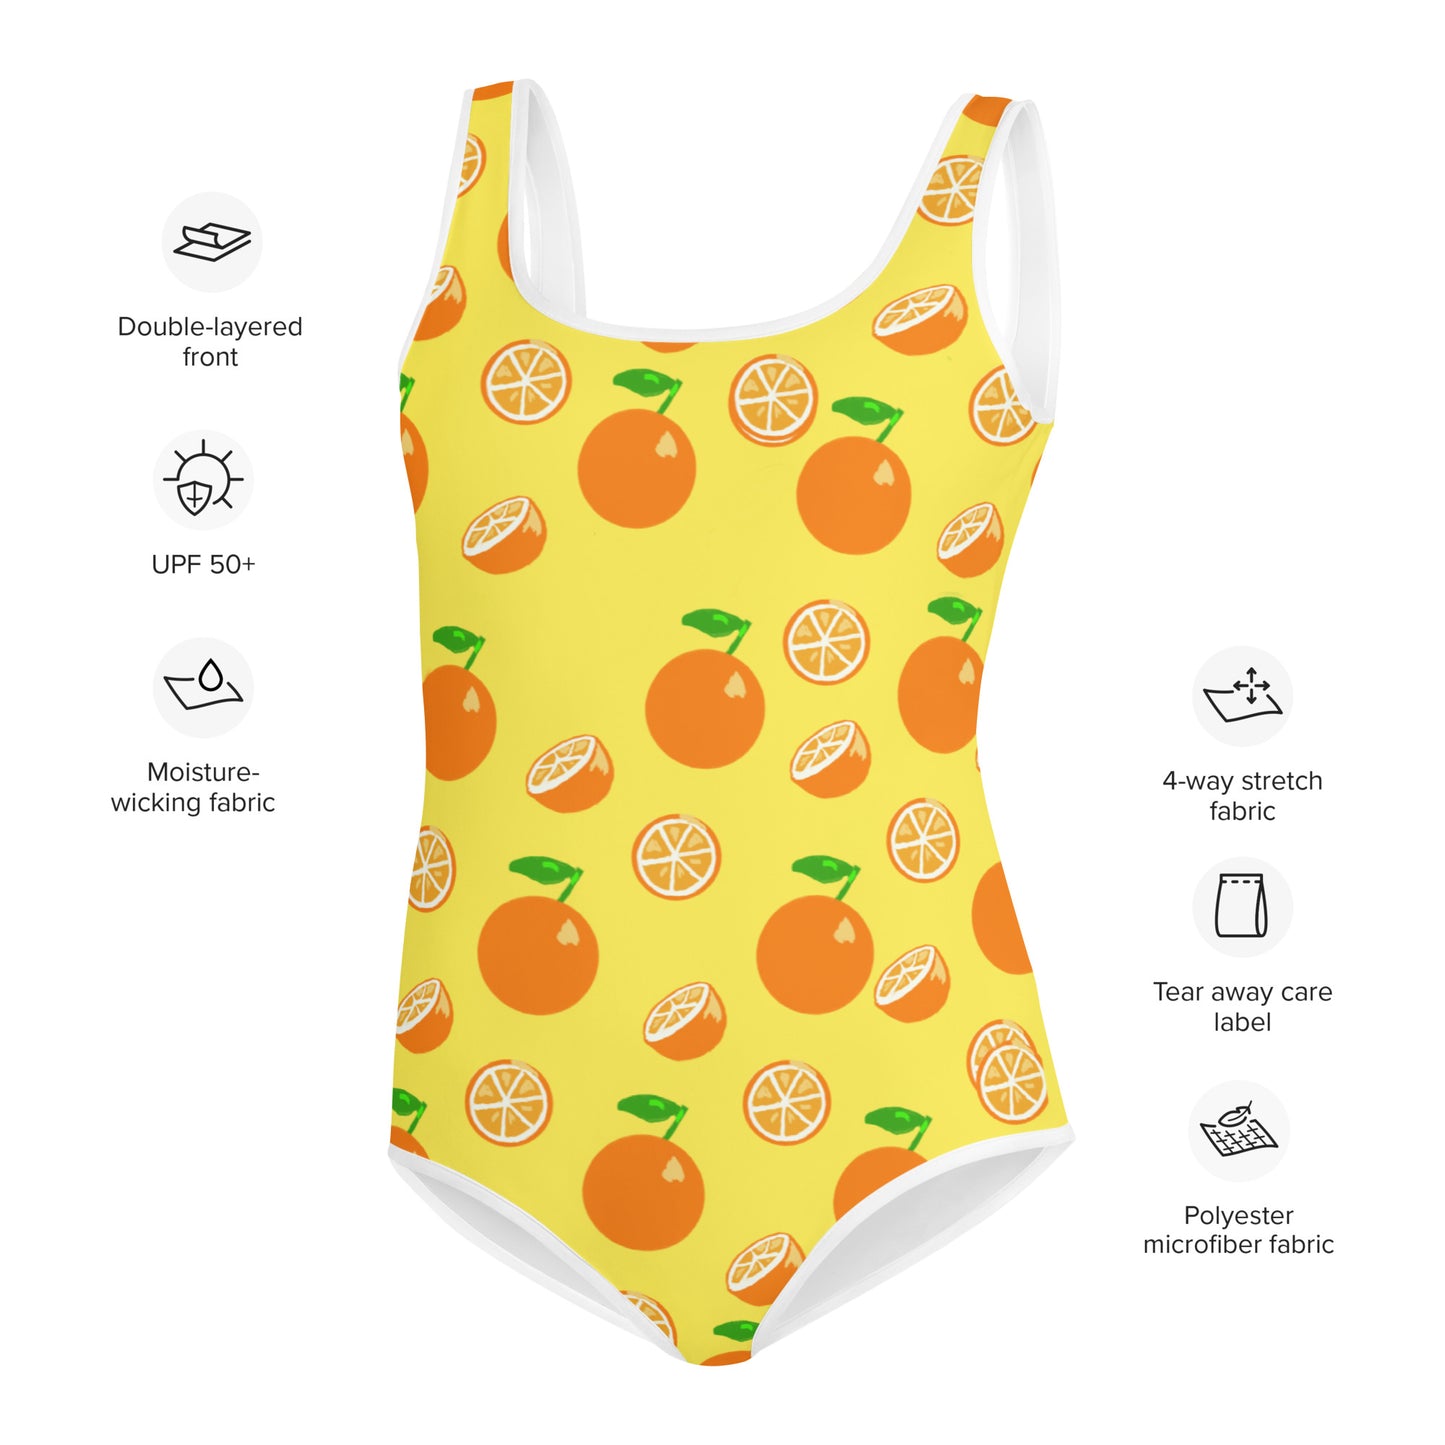 Girls Youth Athletic Swimsuit with Oranges (Size 8-20)